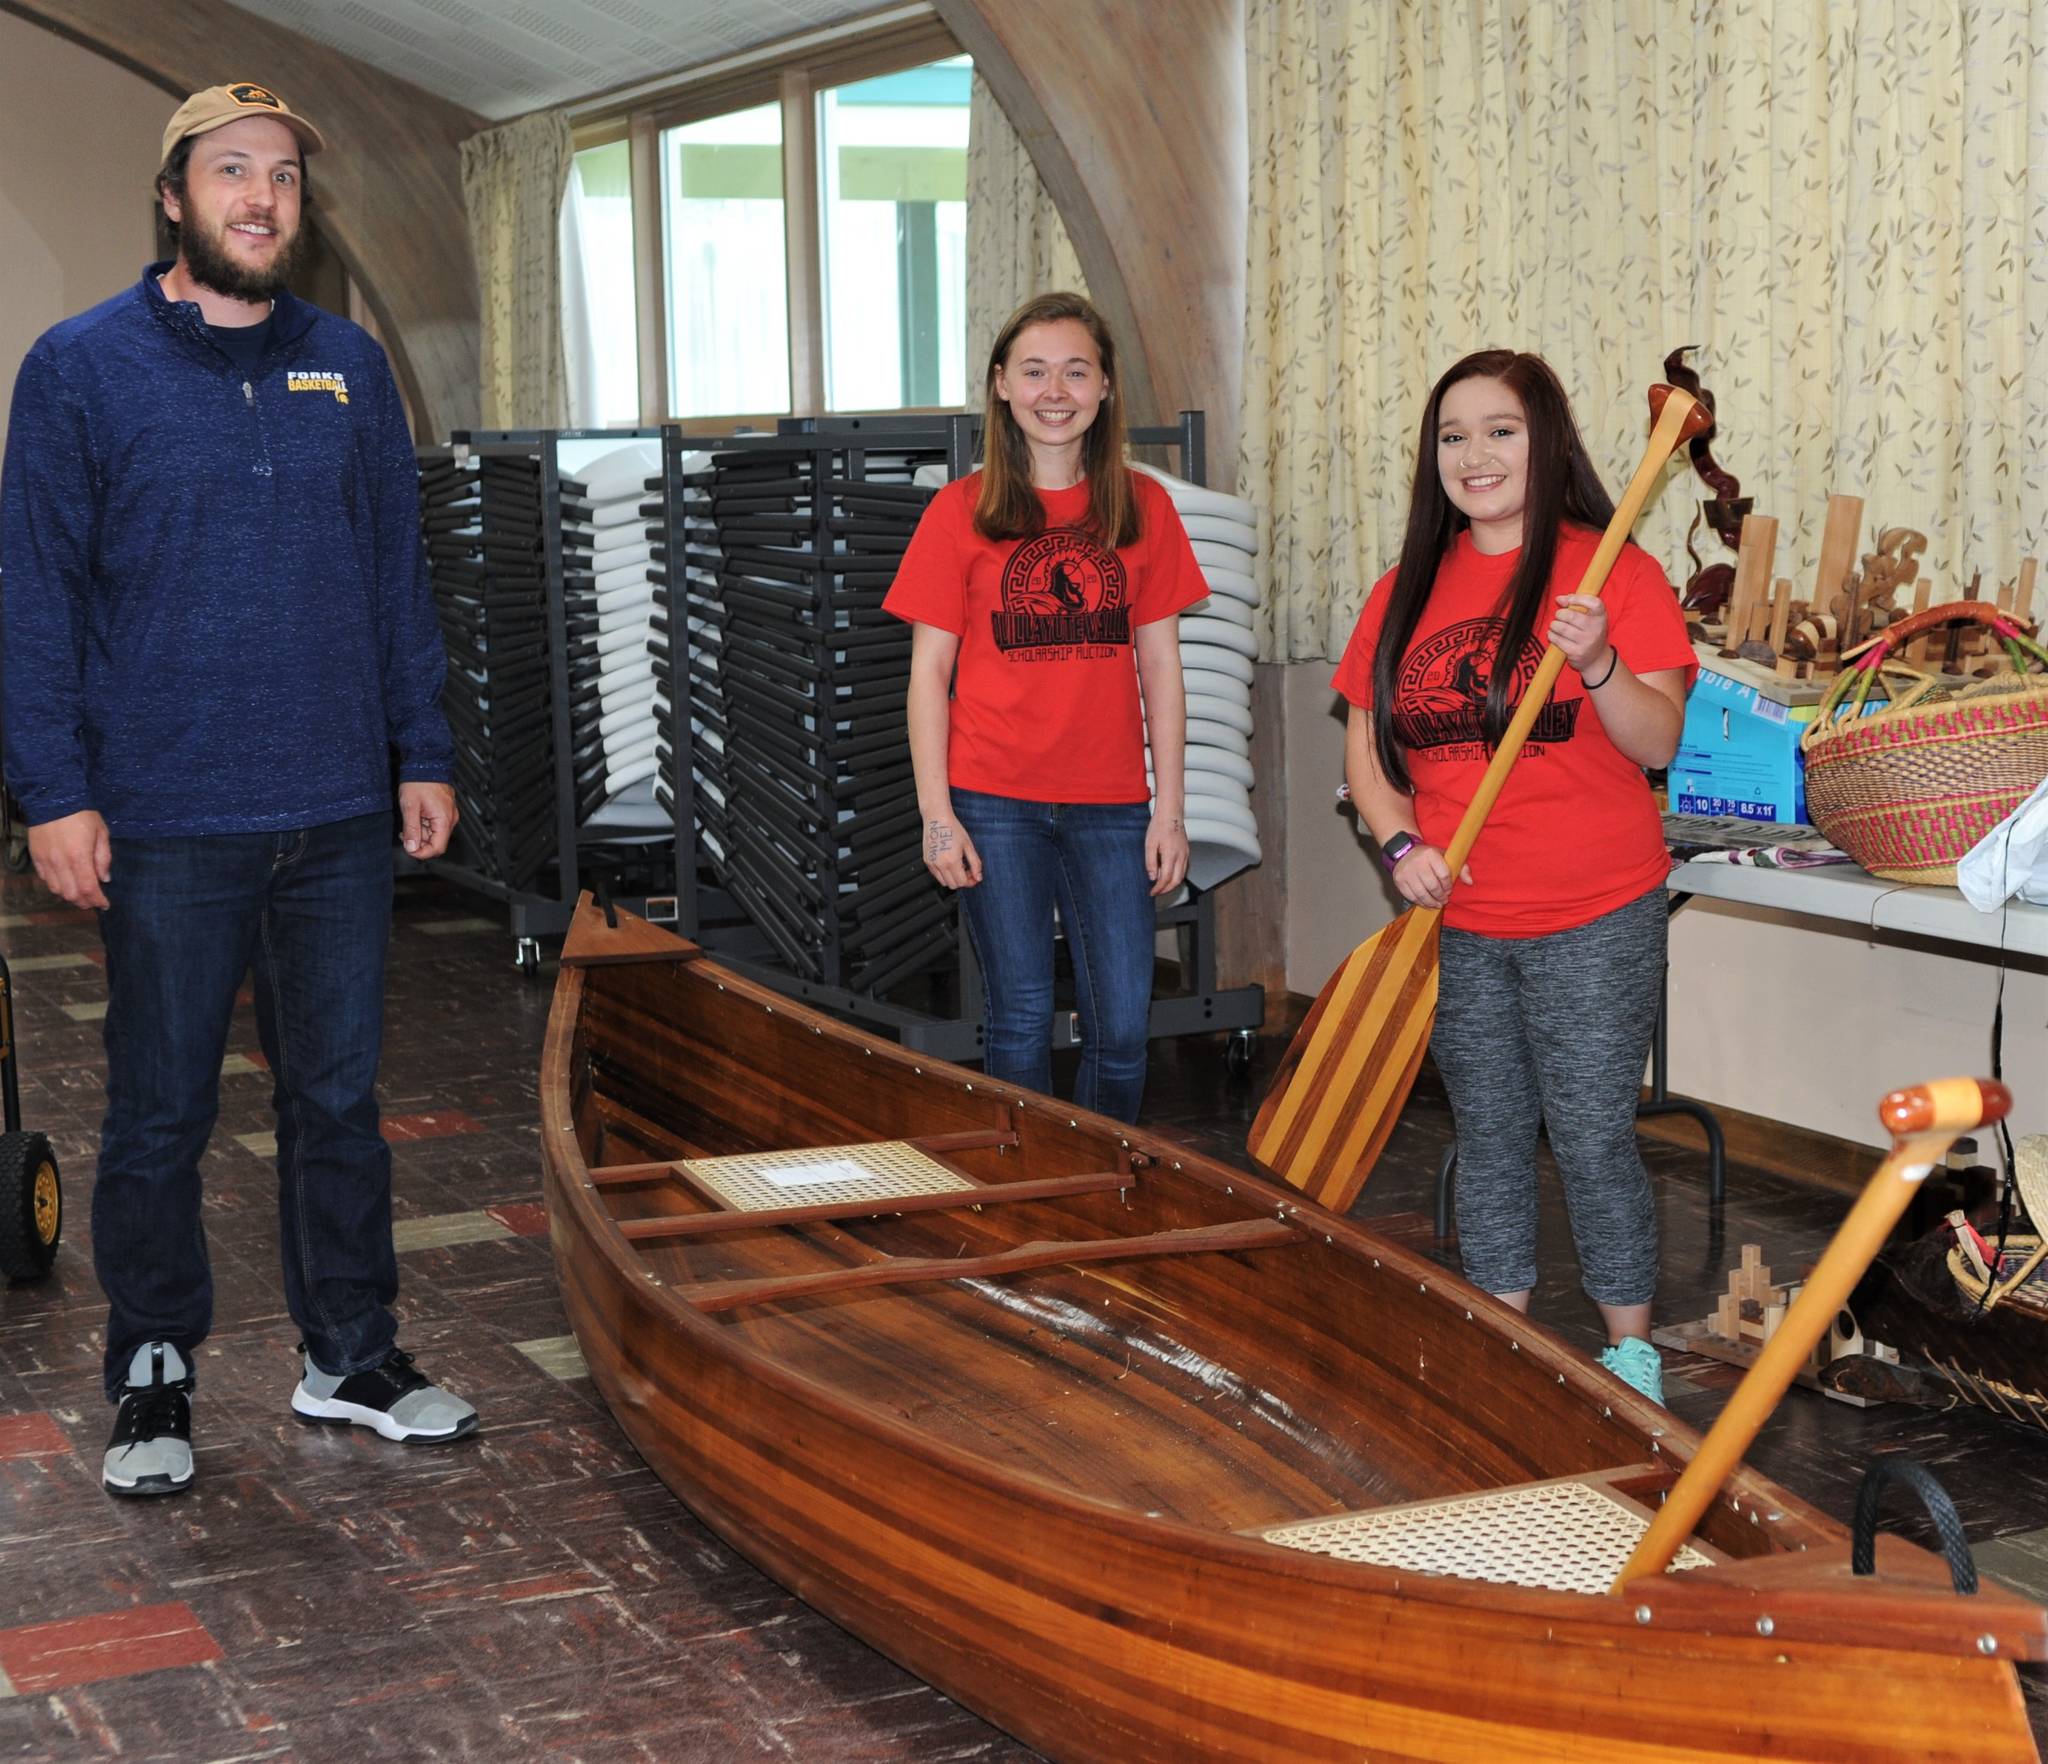 QVSA organizer David Hurn and student Scholarship Auction coordinators, Madelyn Archibald and Olivia Gonzalez gather around a custom-built wooden canoe donated by Rich McMenamin Saturday during the auction. Photo by Lonnie Archibald